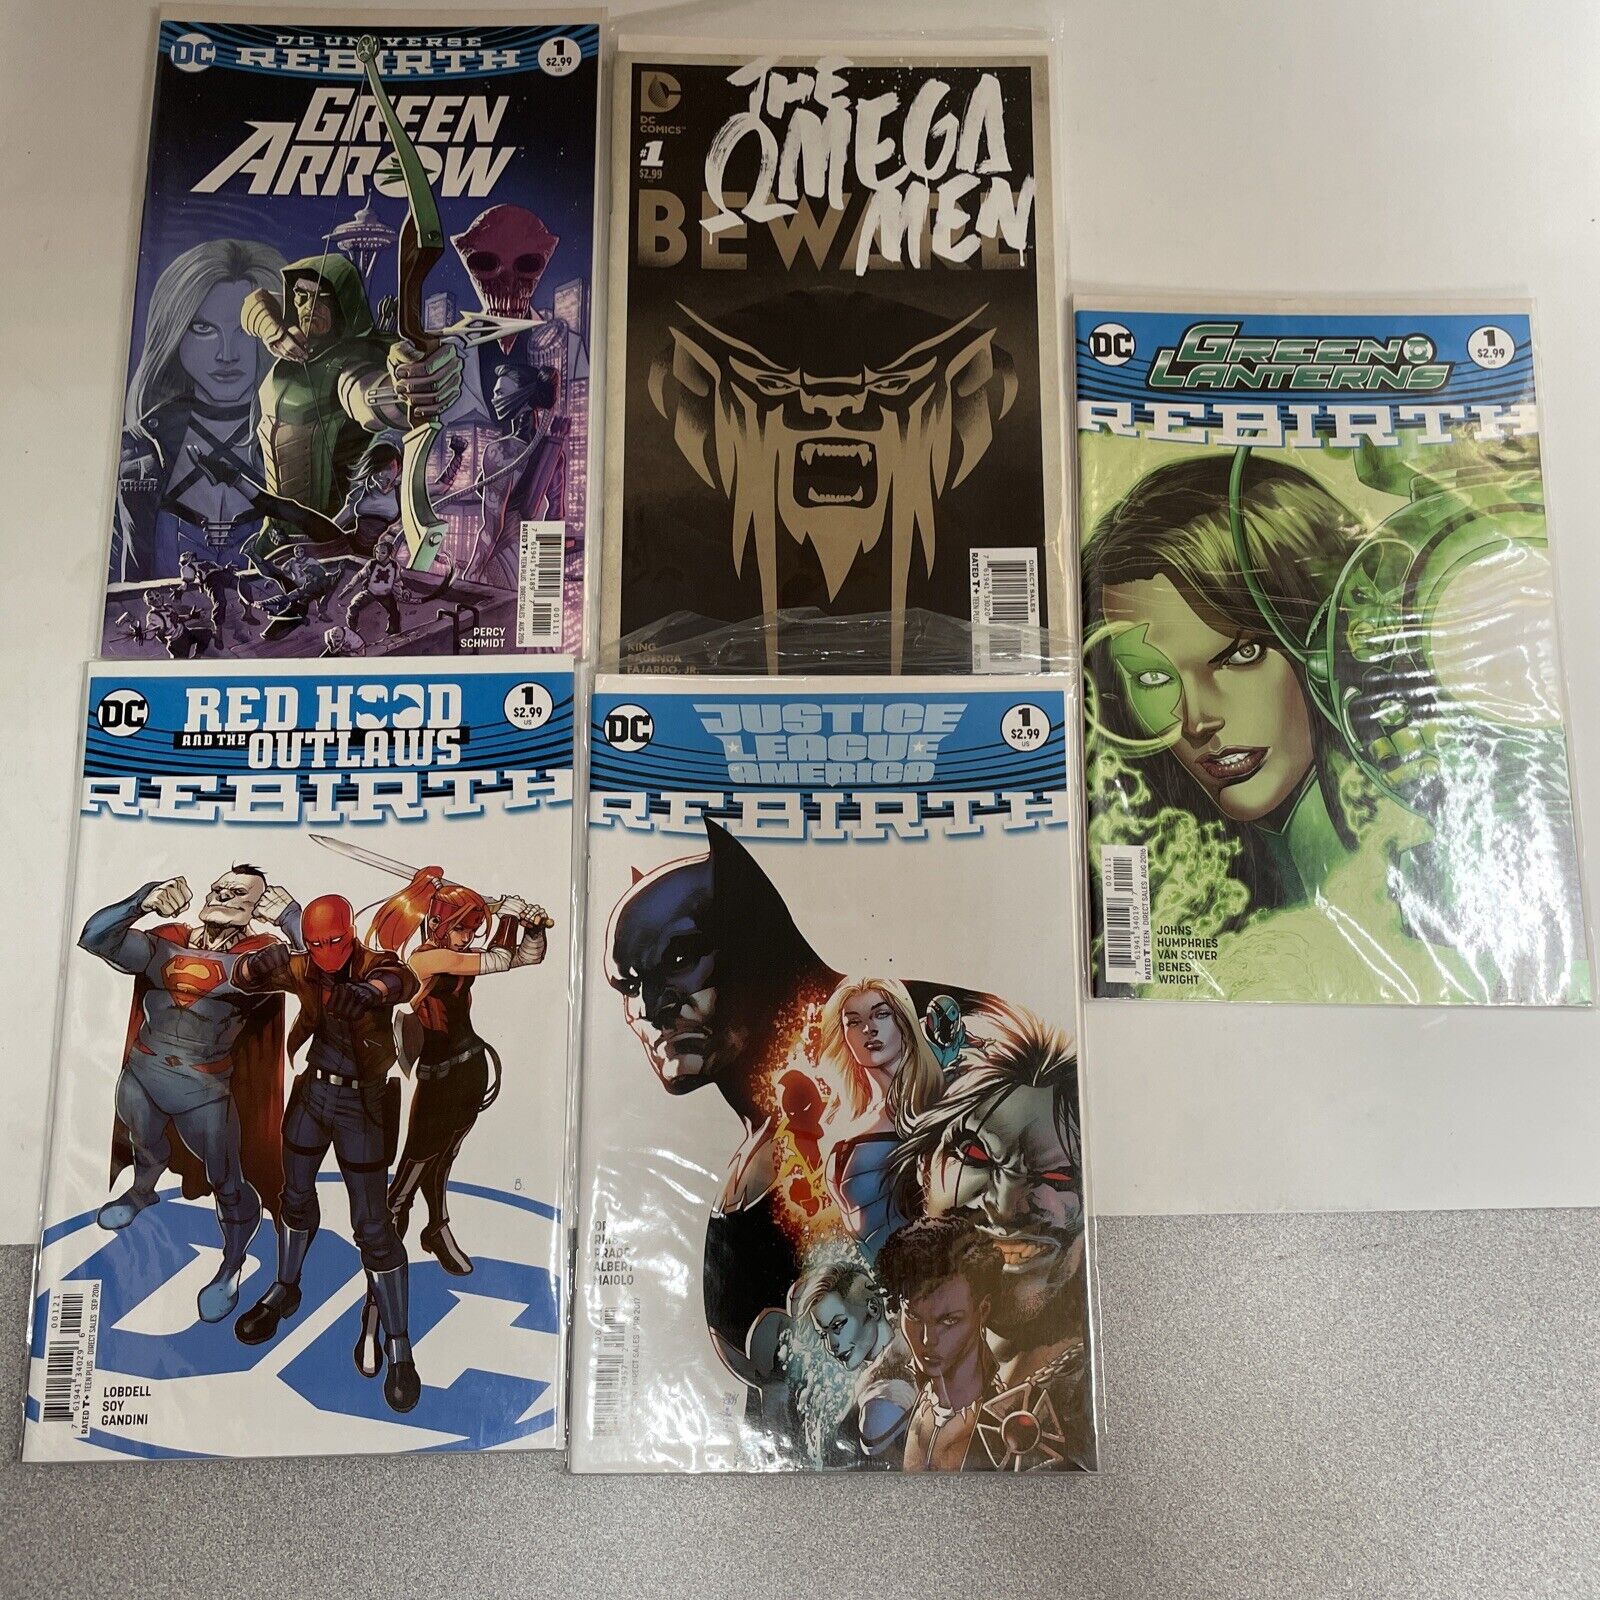 GREEN ARROW, Green Lantern, Justice League, Red Hood, The Omega all #1 DC Comic